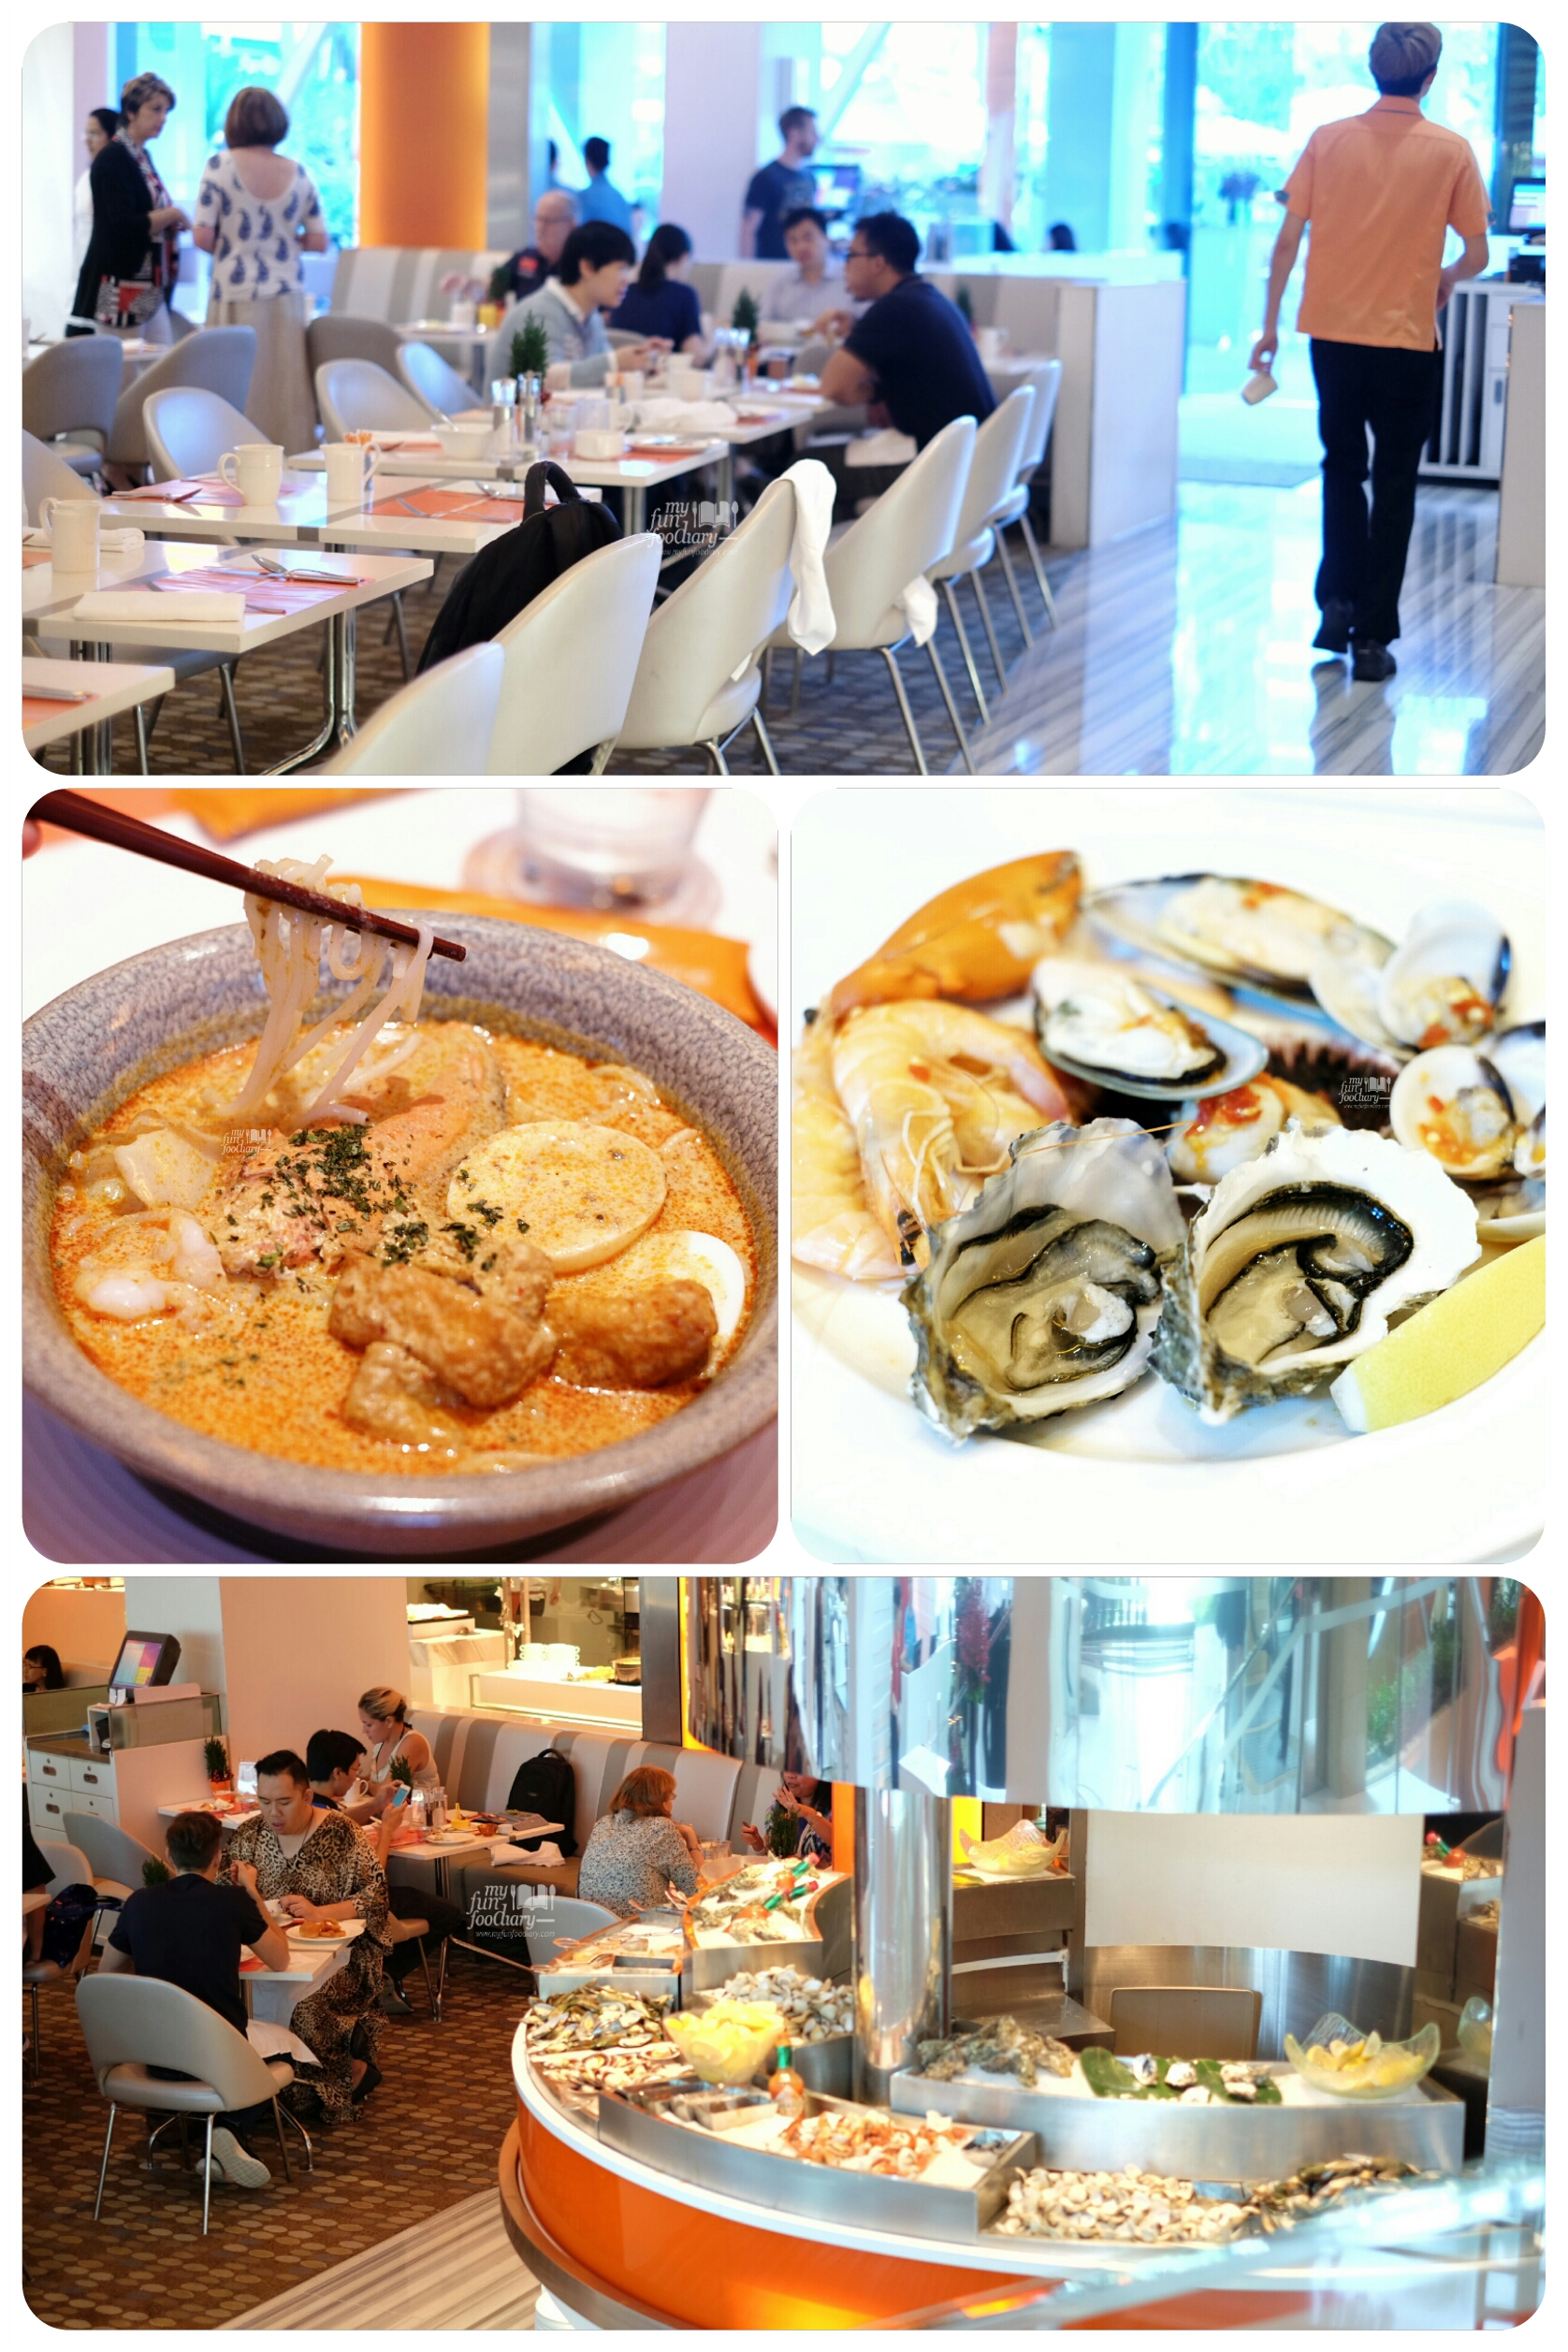 Buffet Lunch at The Line Shangri-La Singapore by Myfunfoodiary